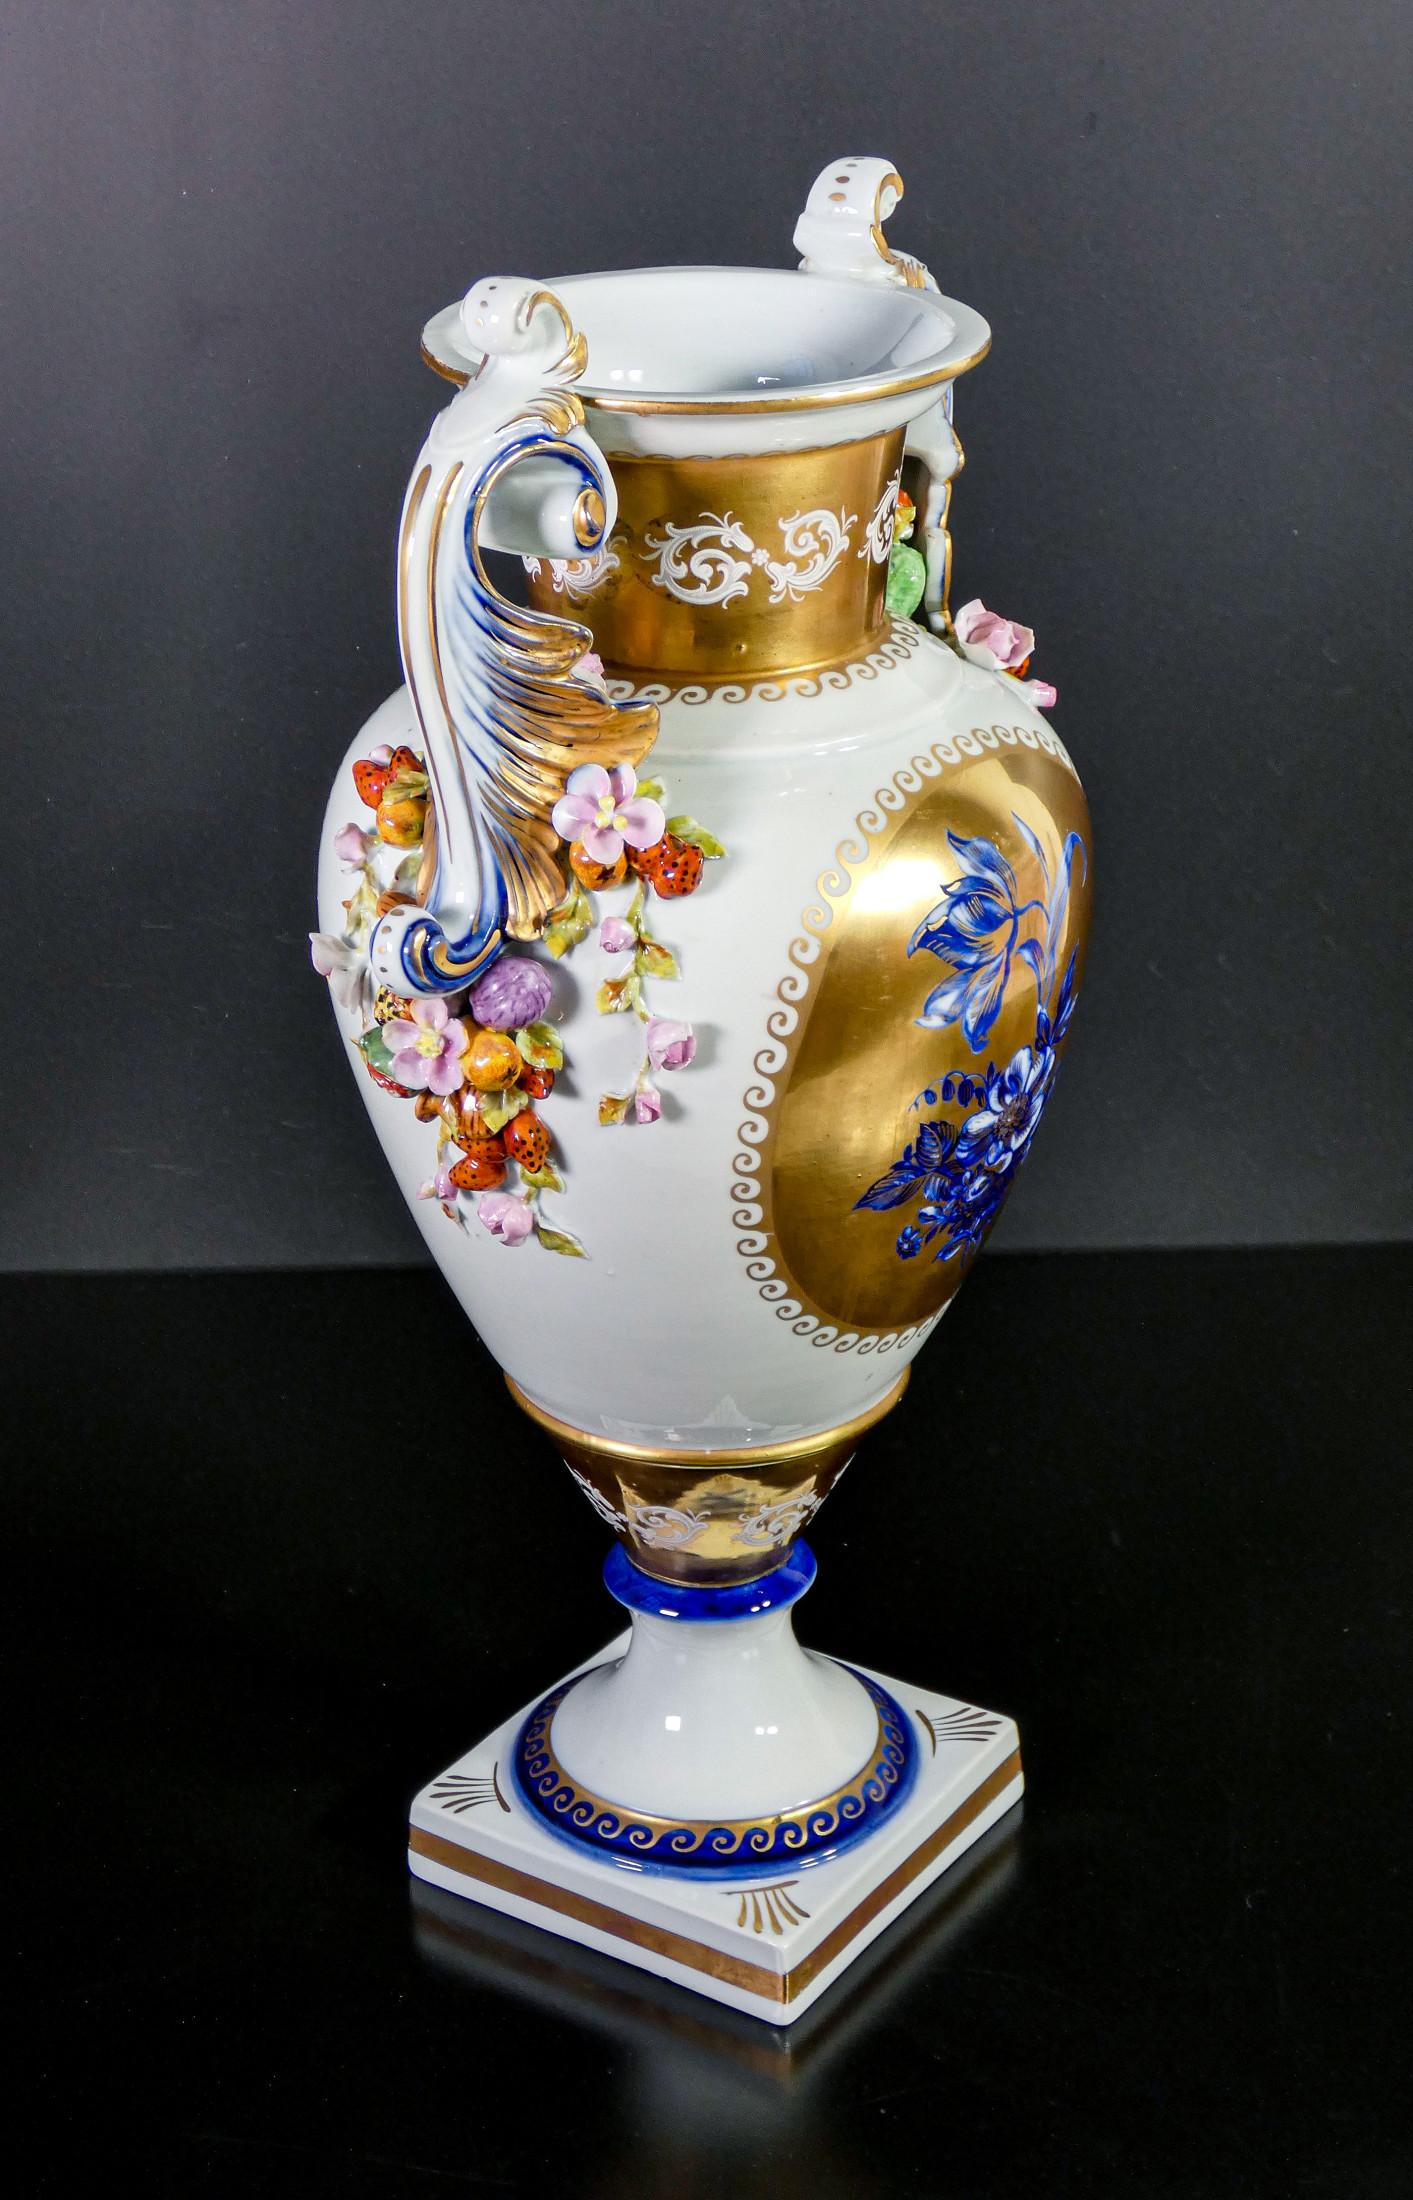 20th Century Two-Handled Vase in Sèvres Porcelain, Modeled and Painted by Hand, France